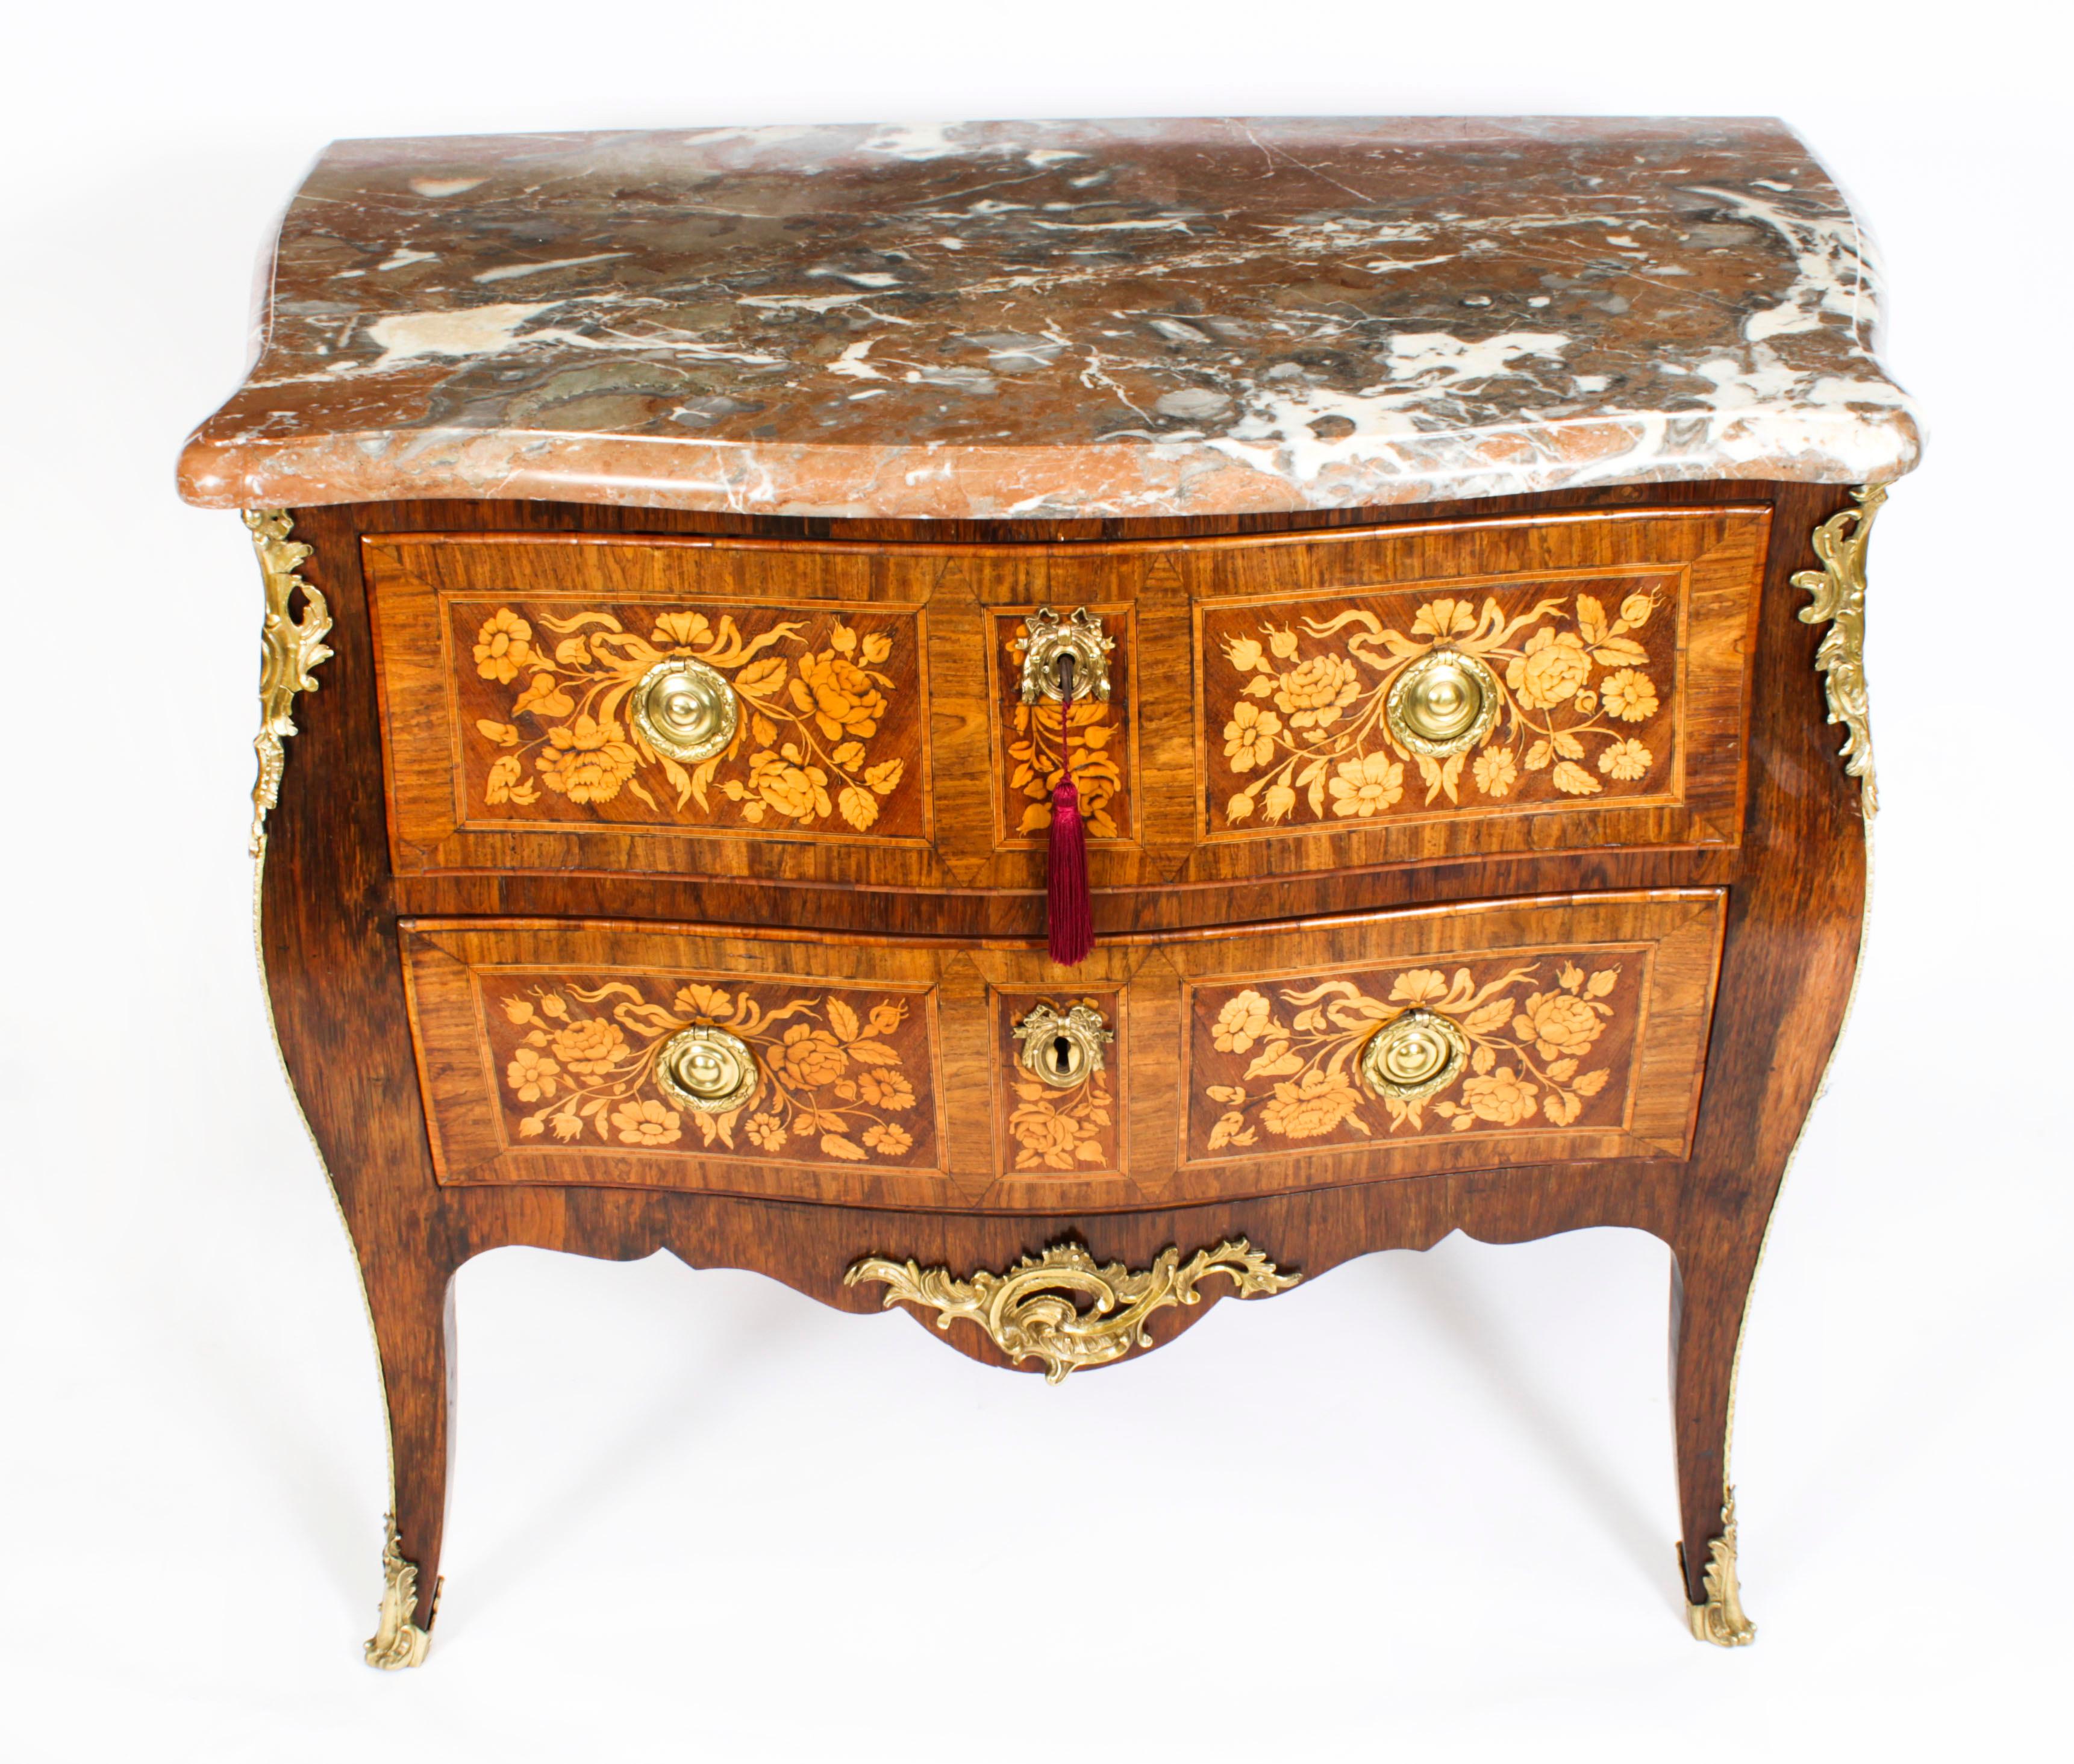 This is a beautiful antique French Louis XVI walnut and marquetry ormolu mounted commode, circa 1780 in date.
 
It has a stunning shaped Rouge de Rance marble top above two full width drawers finely inlaid with scrolling foliate and floral